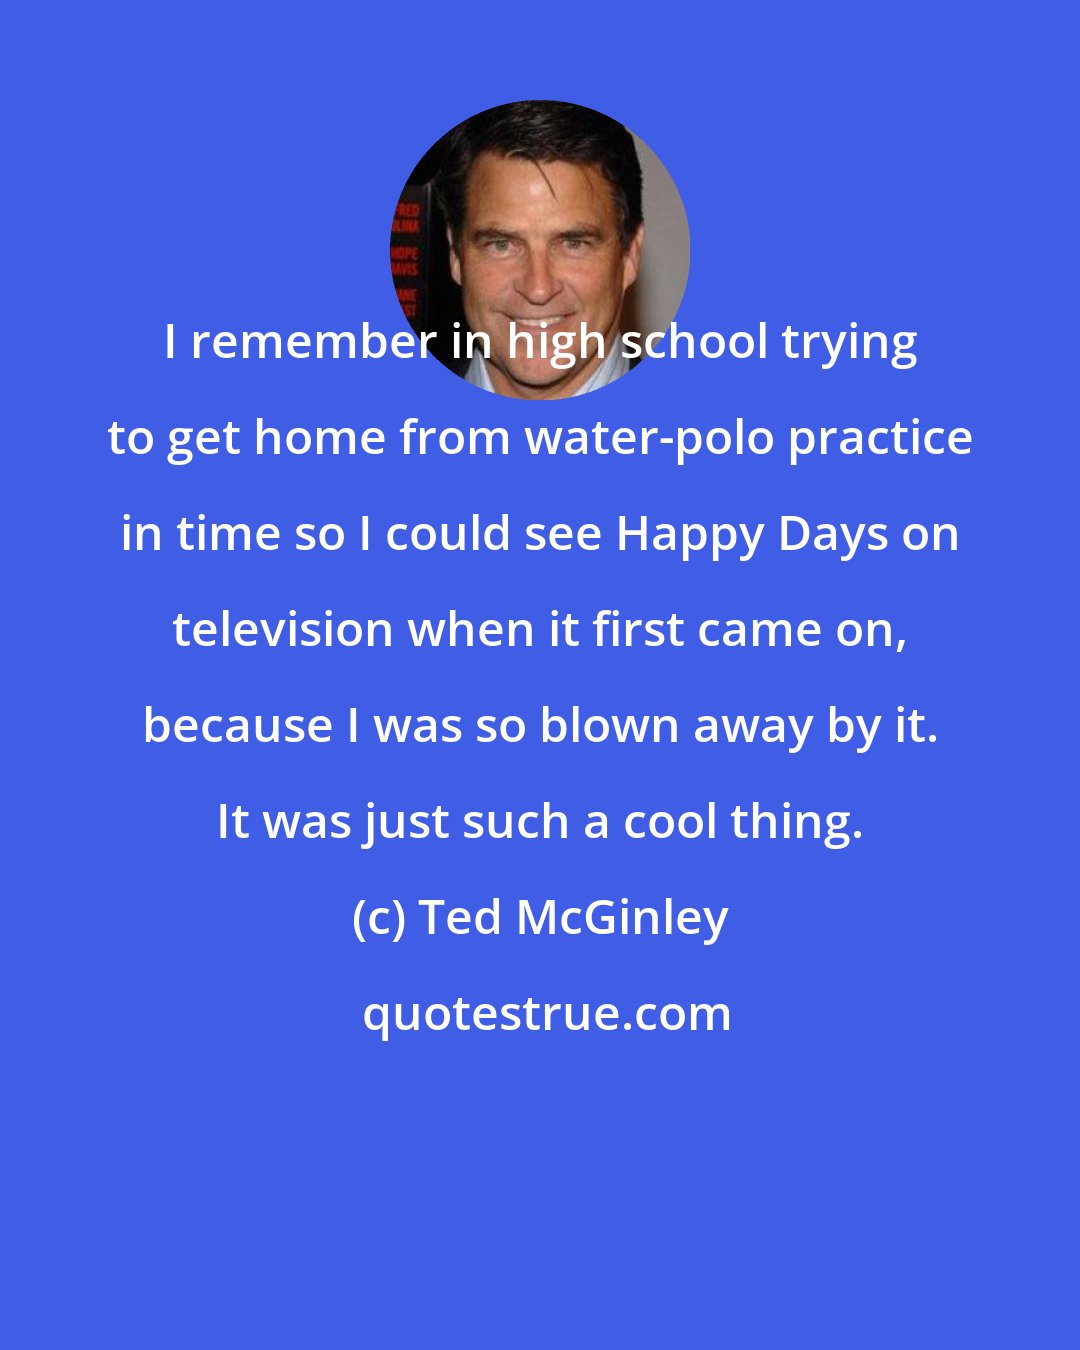 Ted McGinley: I remember in high school trying to get home from water-polo practice in time so I could see Happy Days on television when it first came on, because I was so blown away by it. It was just such a cool thing.